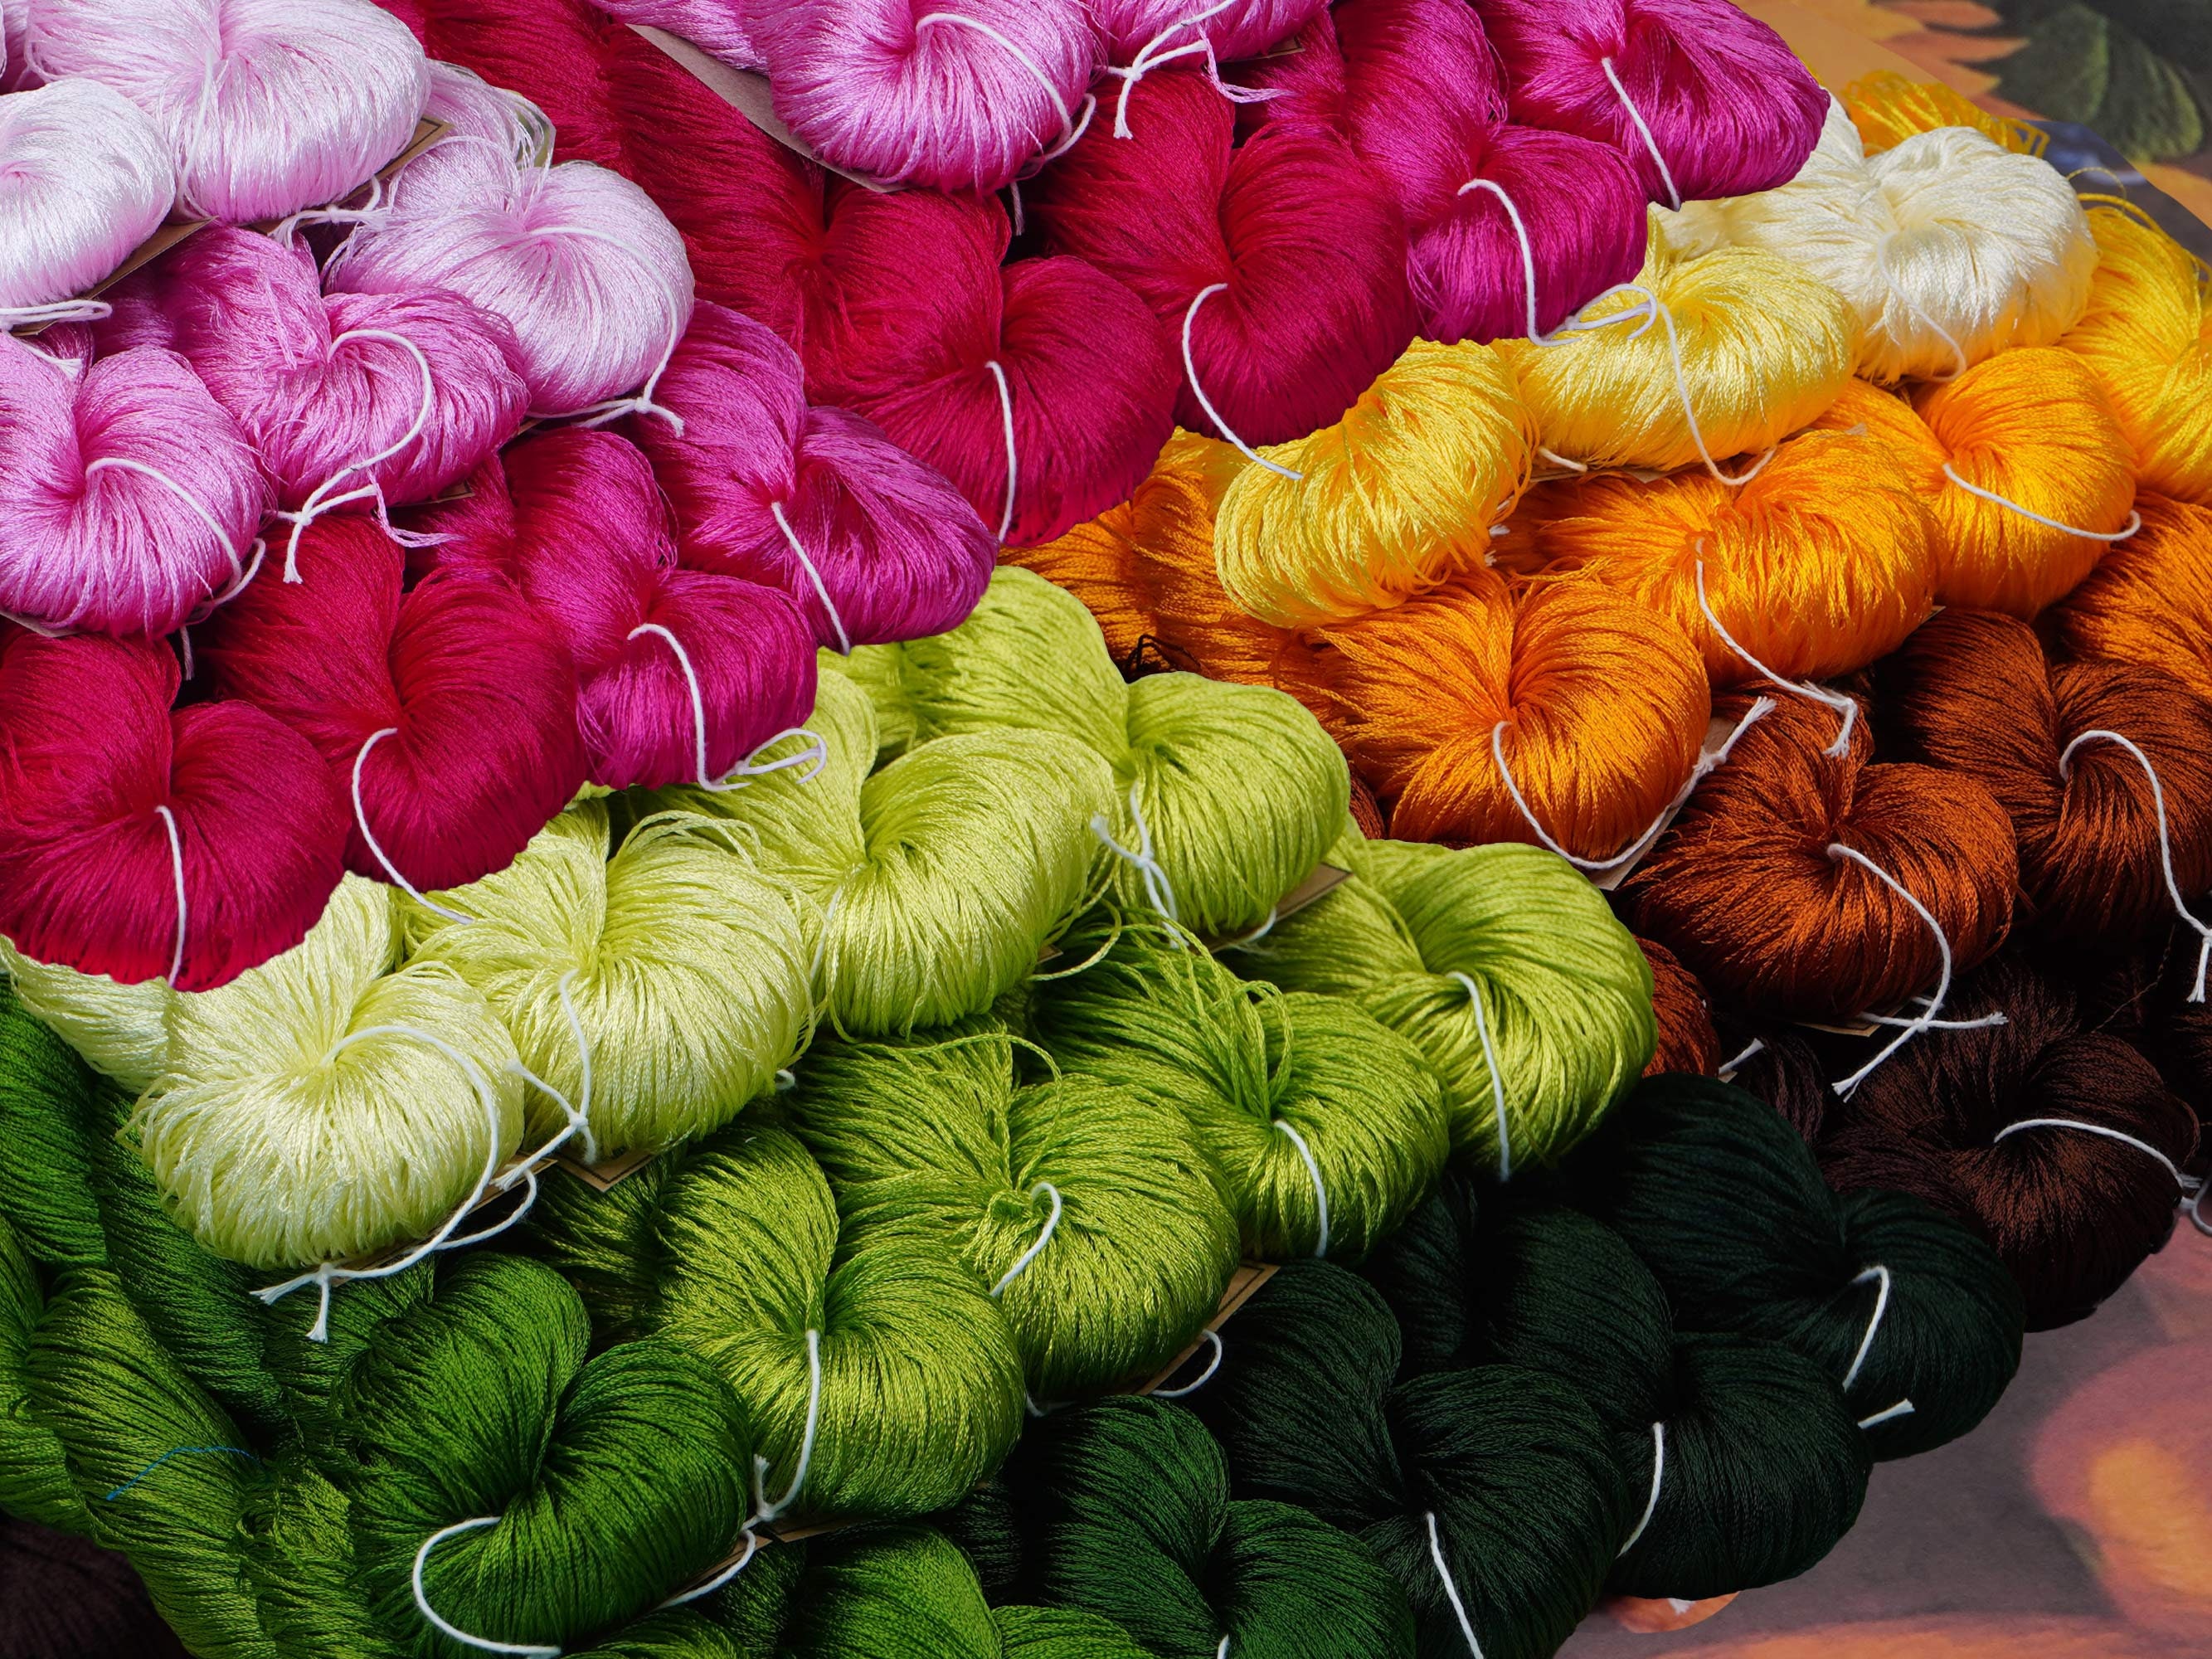 Silk Hand Embroidery Thread 101: Getting Started with Silk –